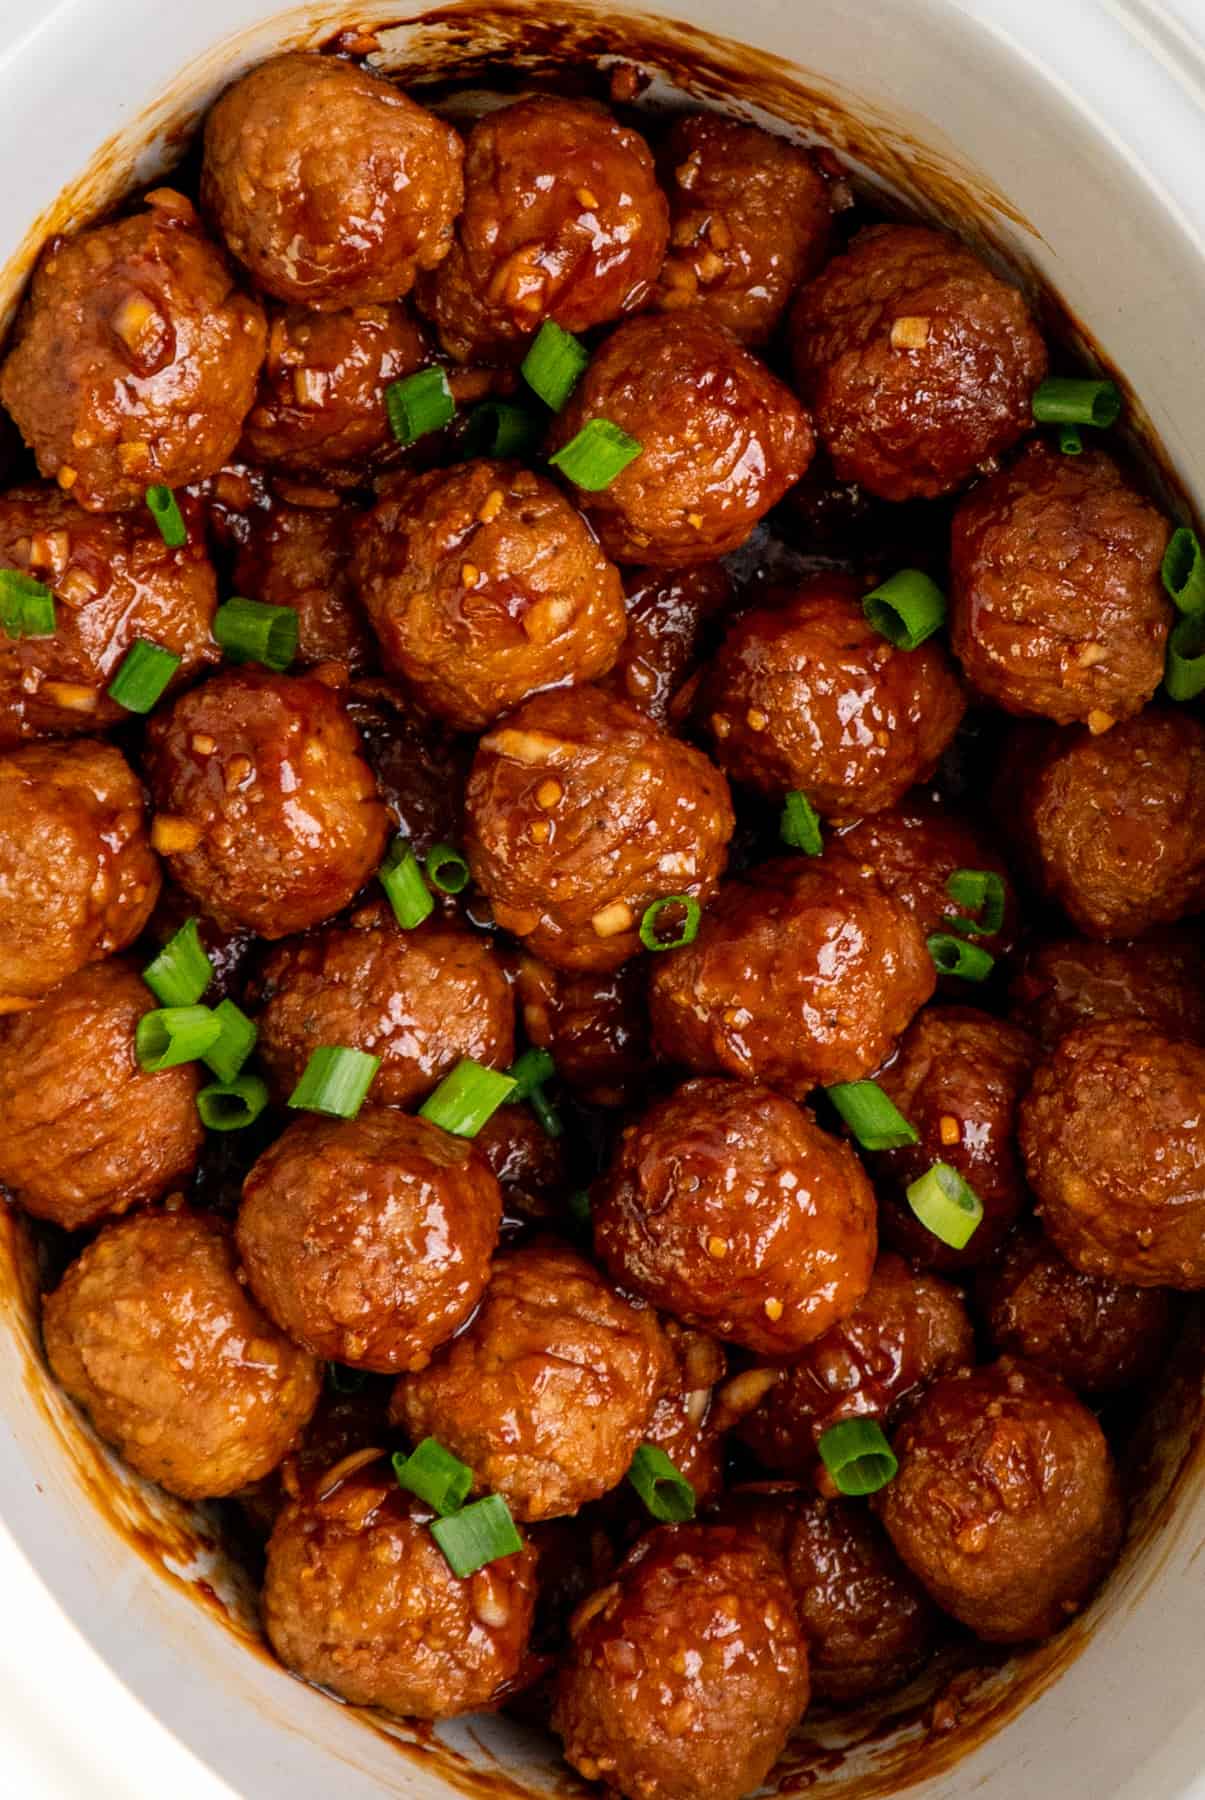 Honey garlic meatballs in a white slow cooker garnished with green onions.